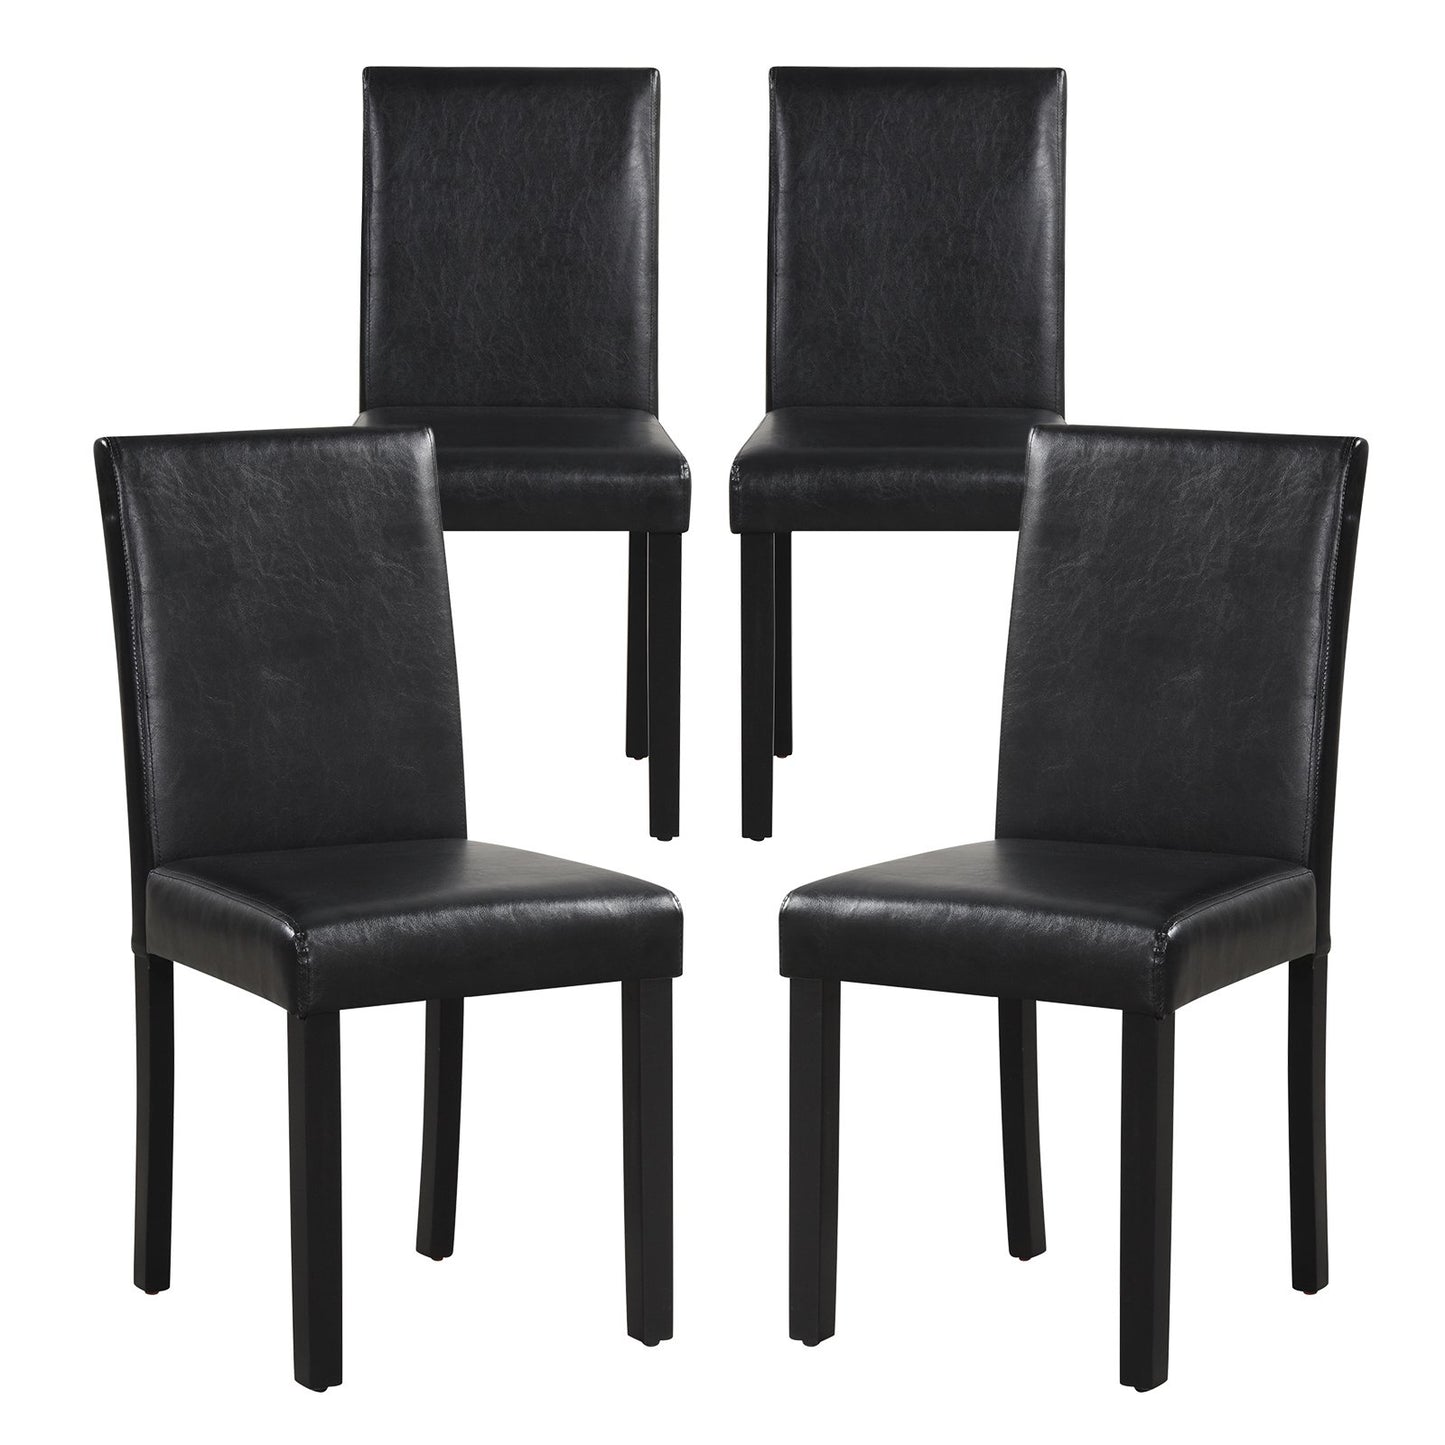 Dining Chair Set of 4 Upholstered Kitchen Dinette Chairs with Wood Frame, Black